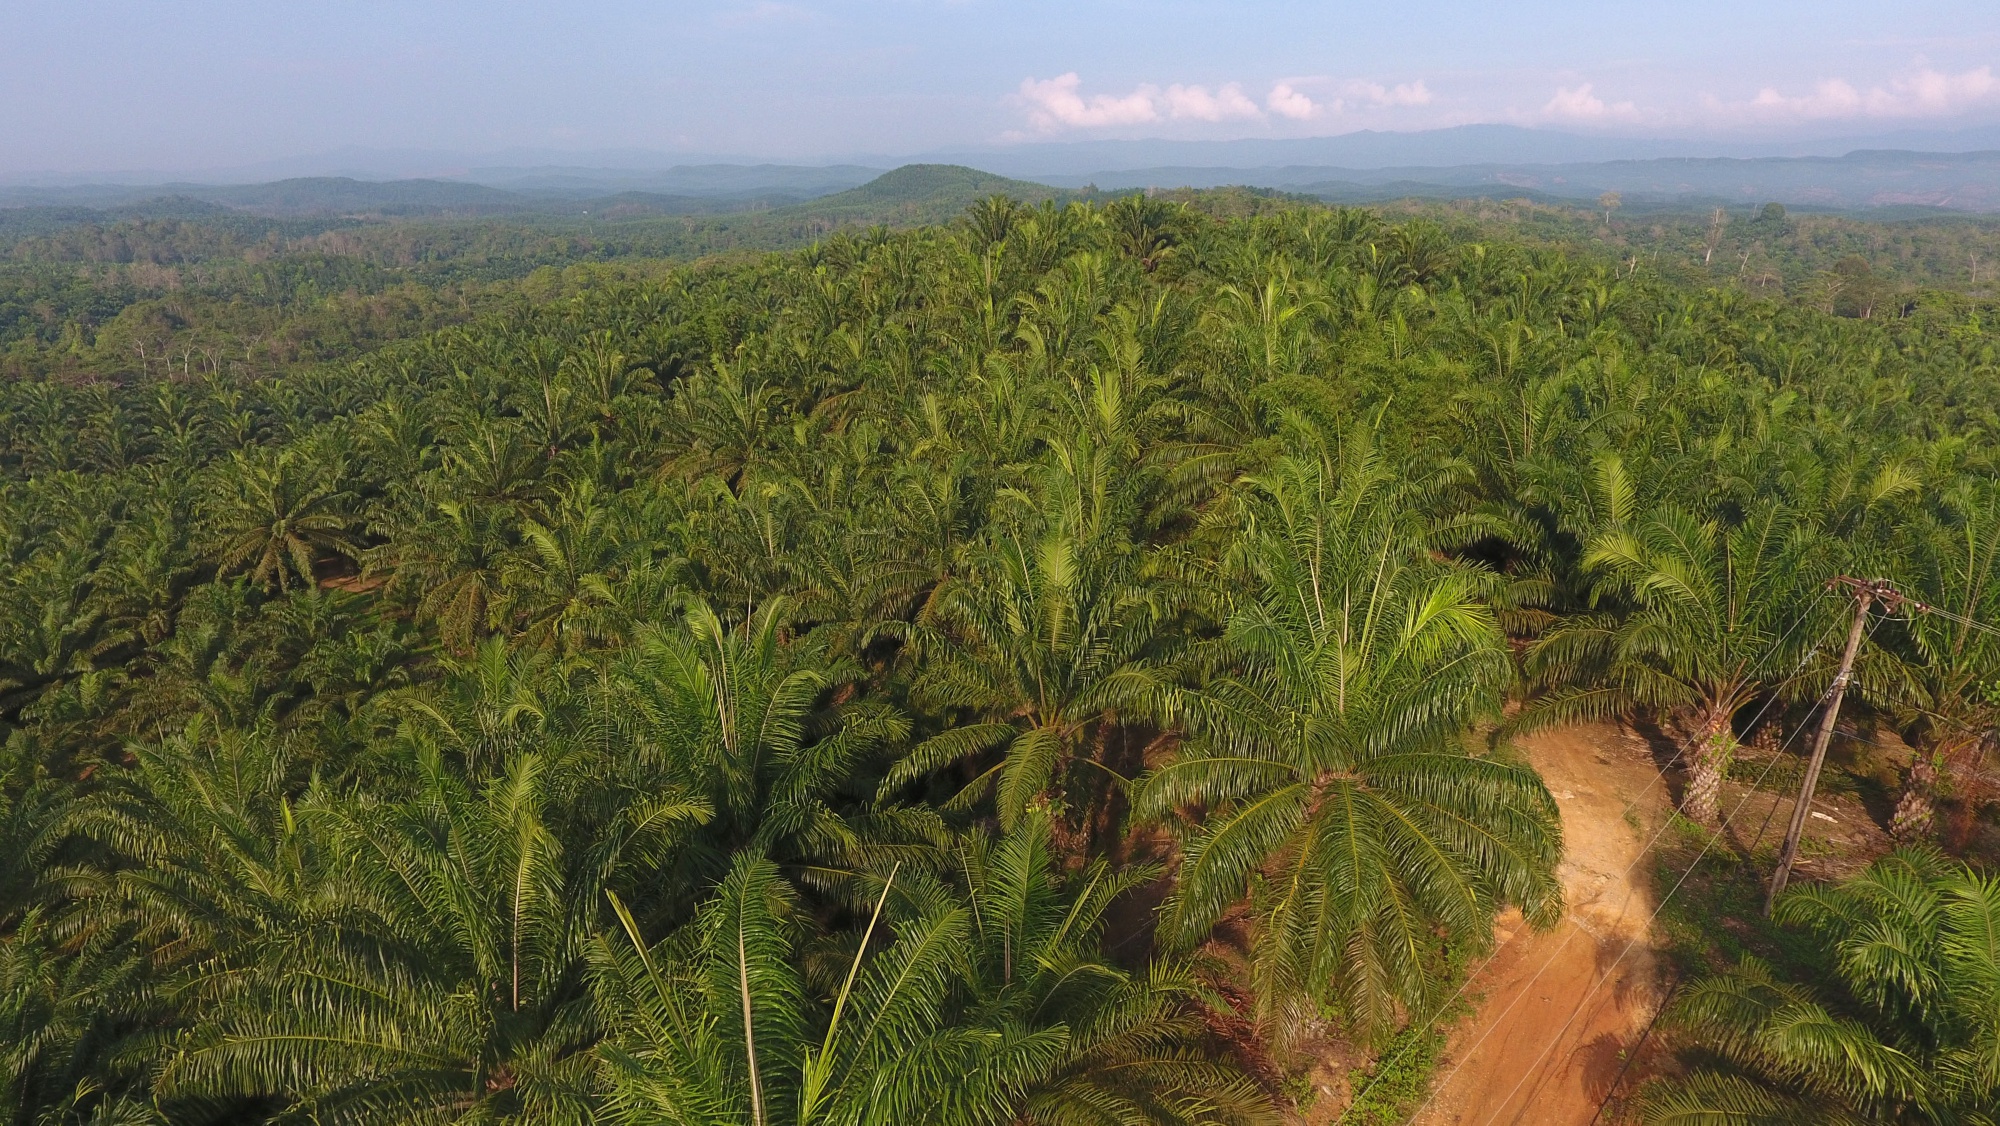 Verifying current and historical sustainable palm oil cultivation